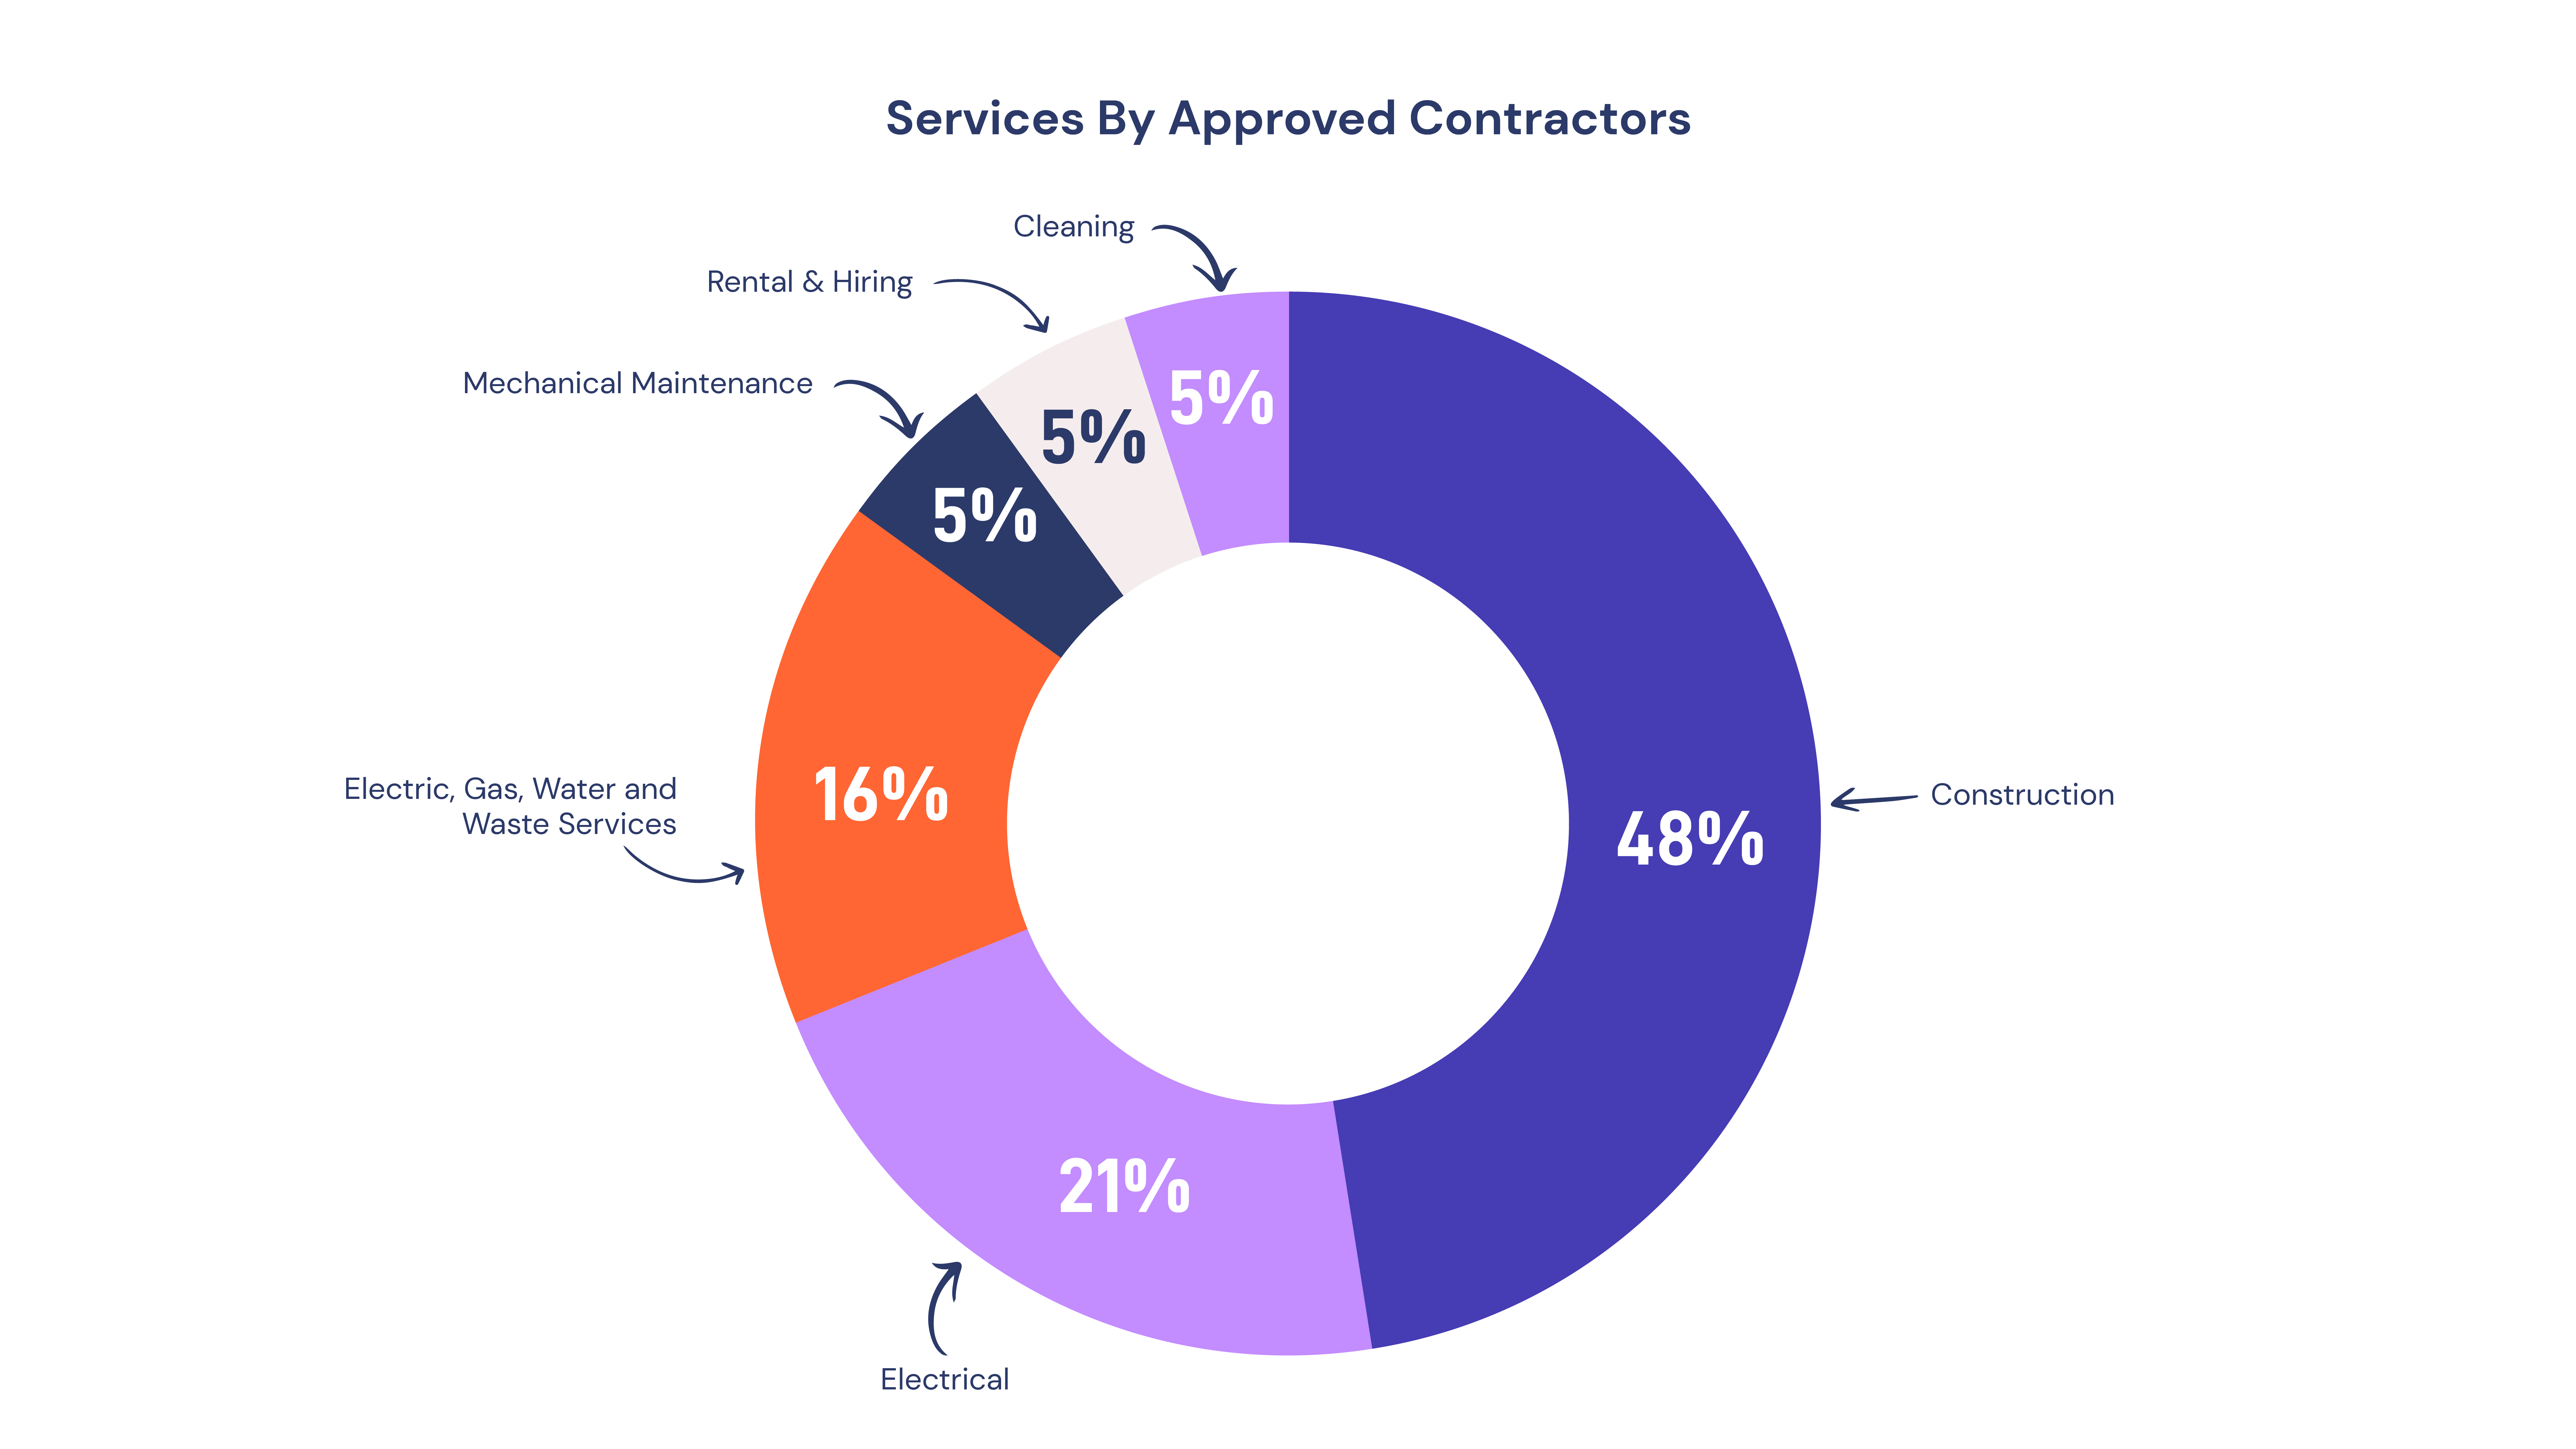 Services by Approved Contractors